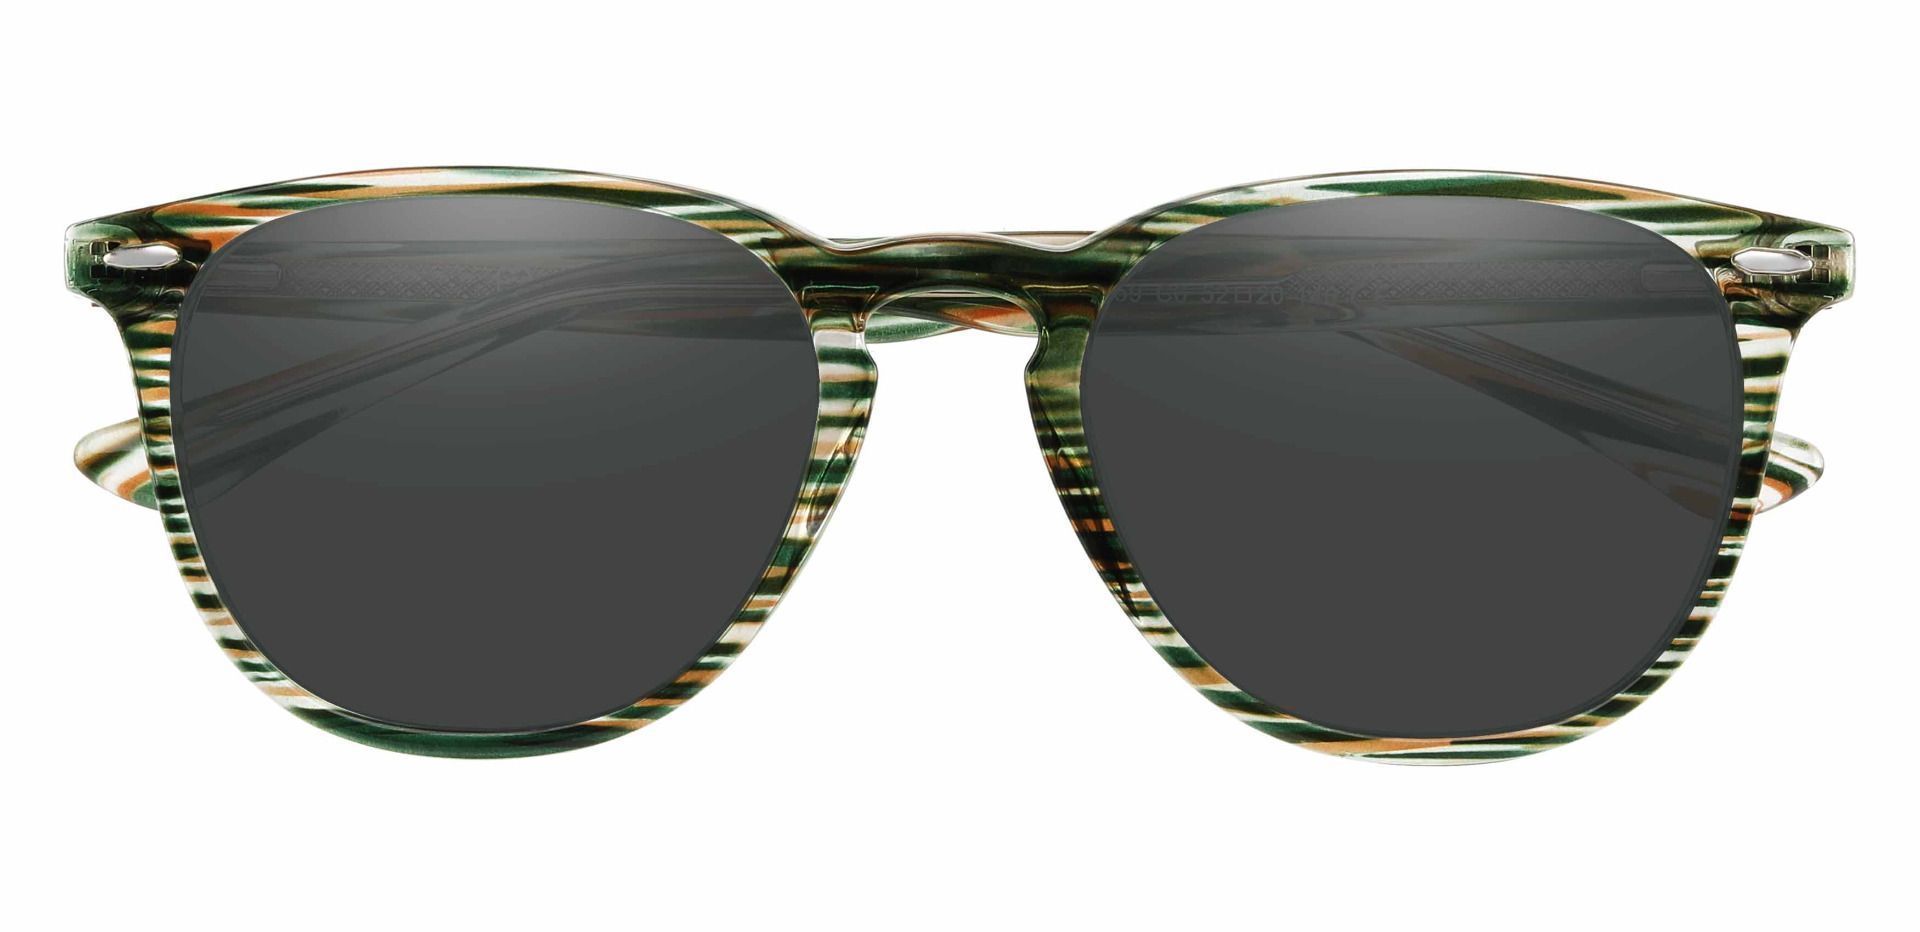 Sycamore Oval Reading Sunglasses - Green Frame With Gray Lenses